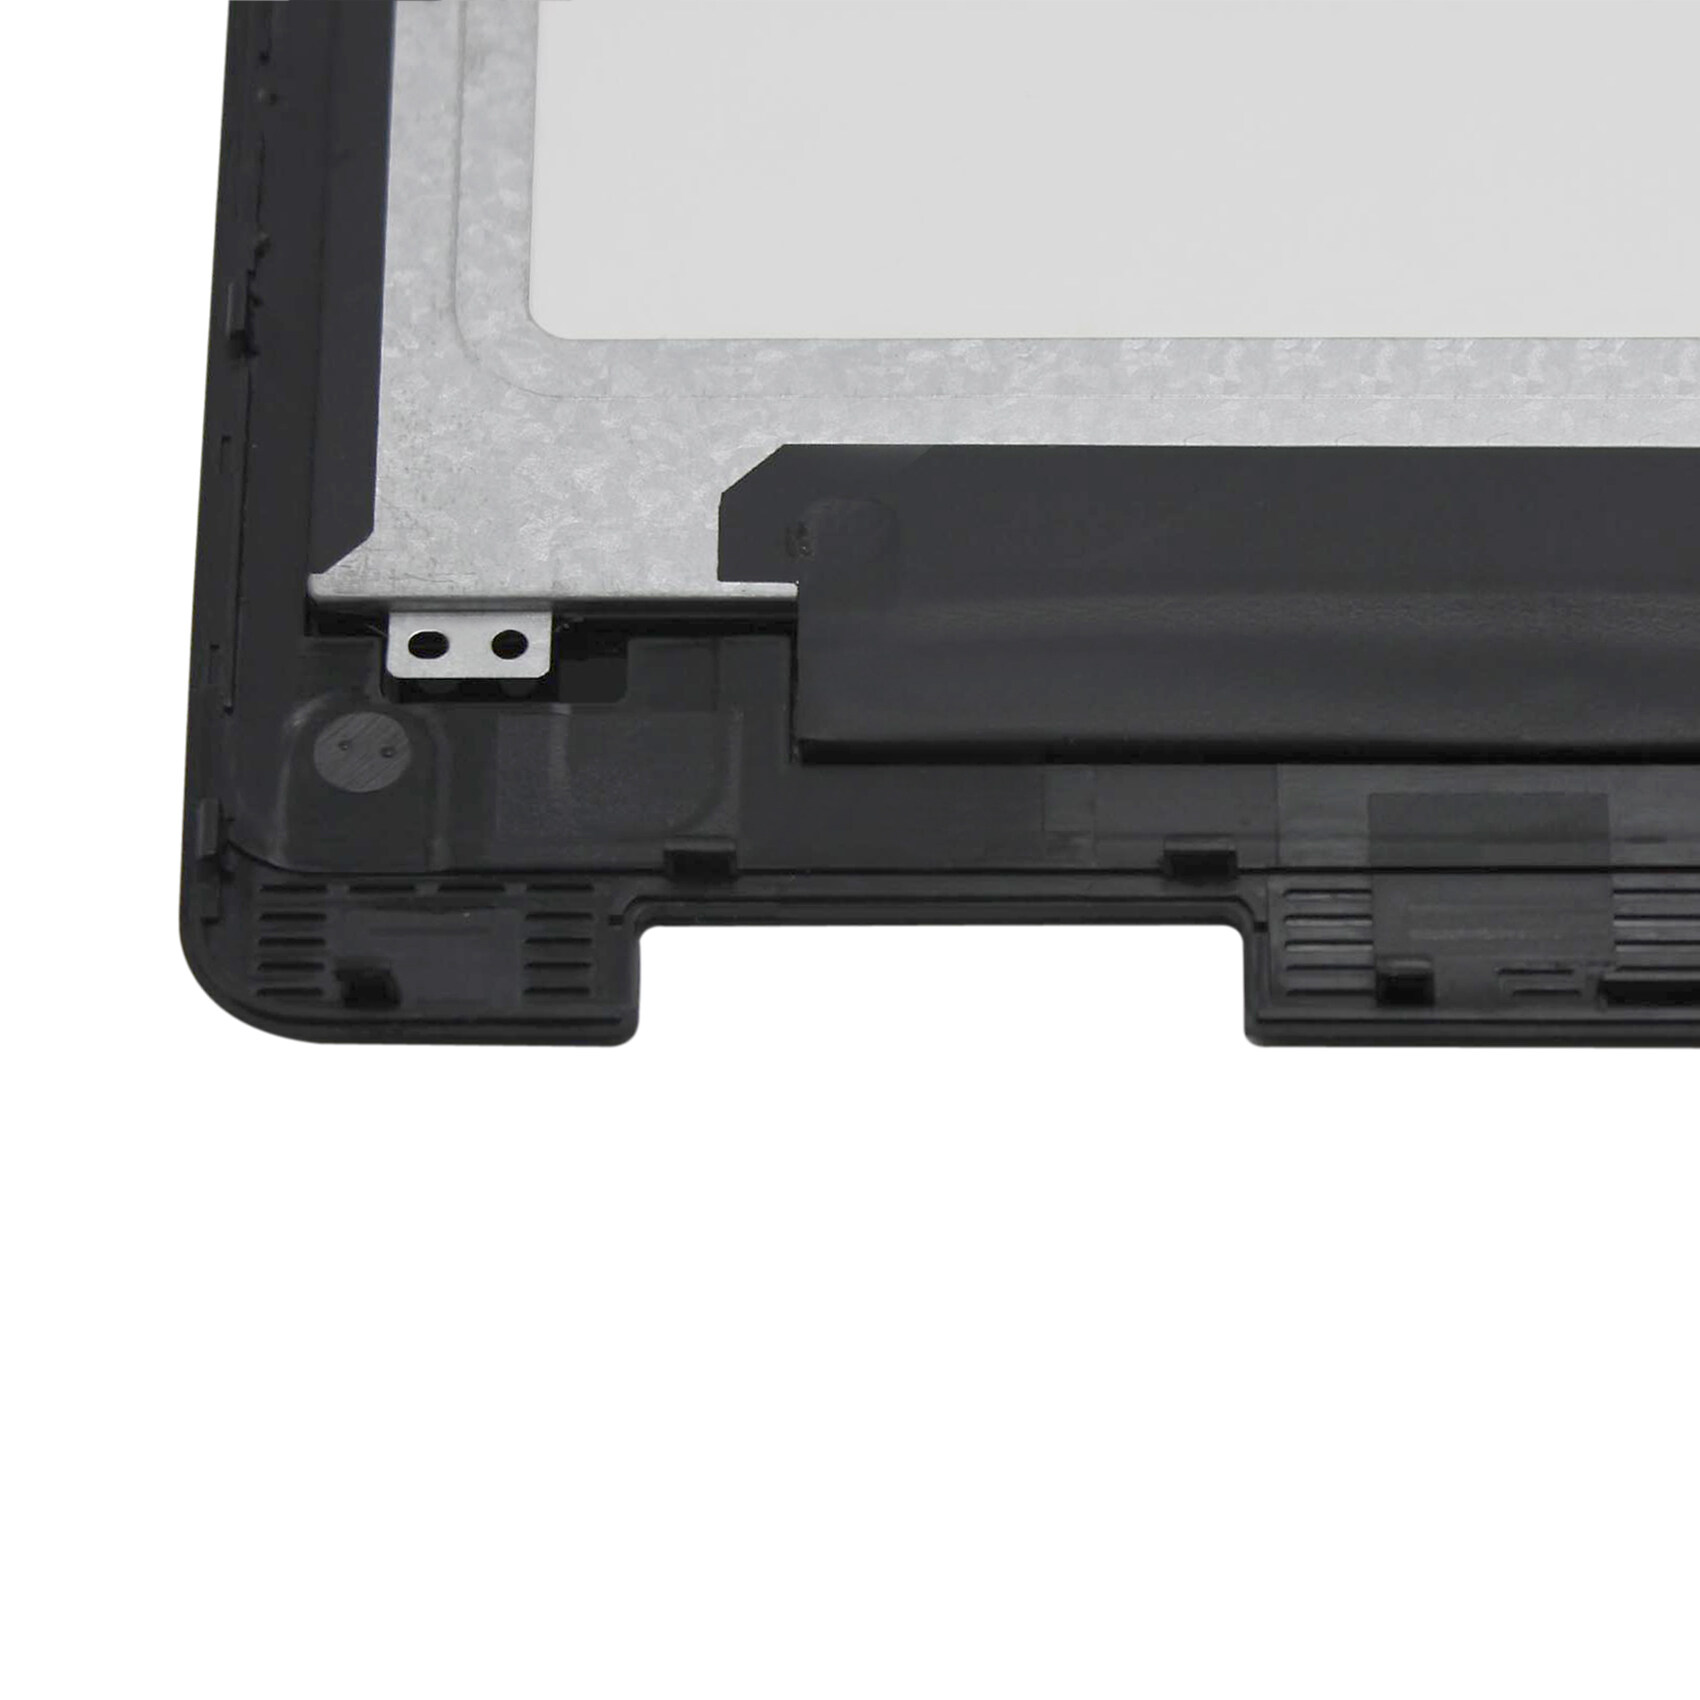 Kreplacement For Dell Inspiron 13 7368 1920x1080 LCD Screen Touch Digitizer Assembly + Frame